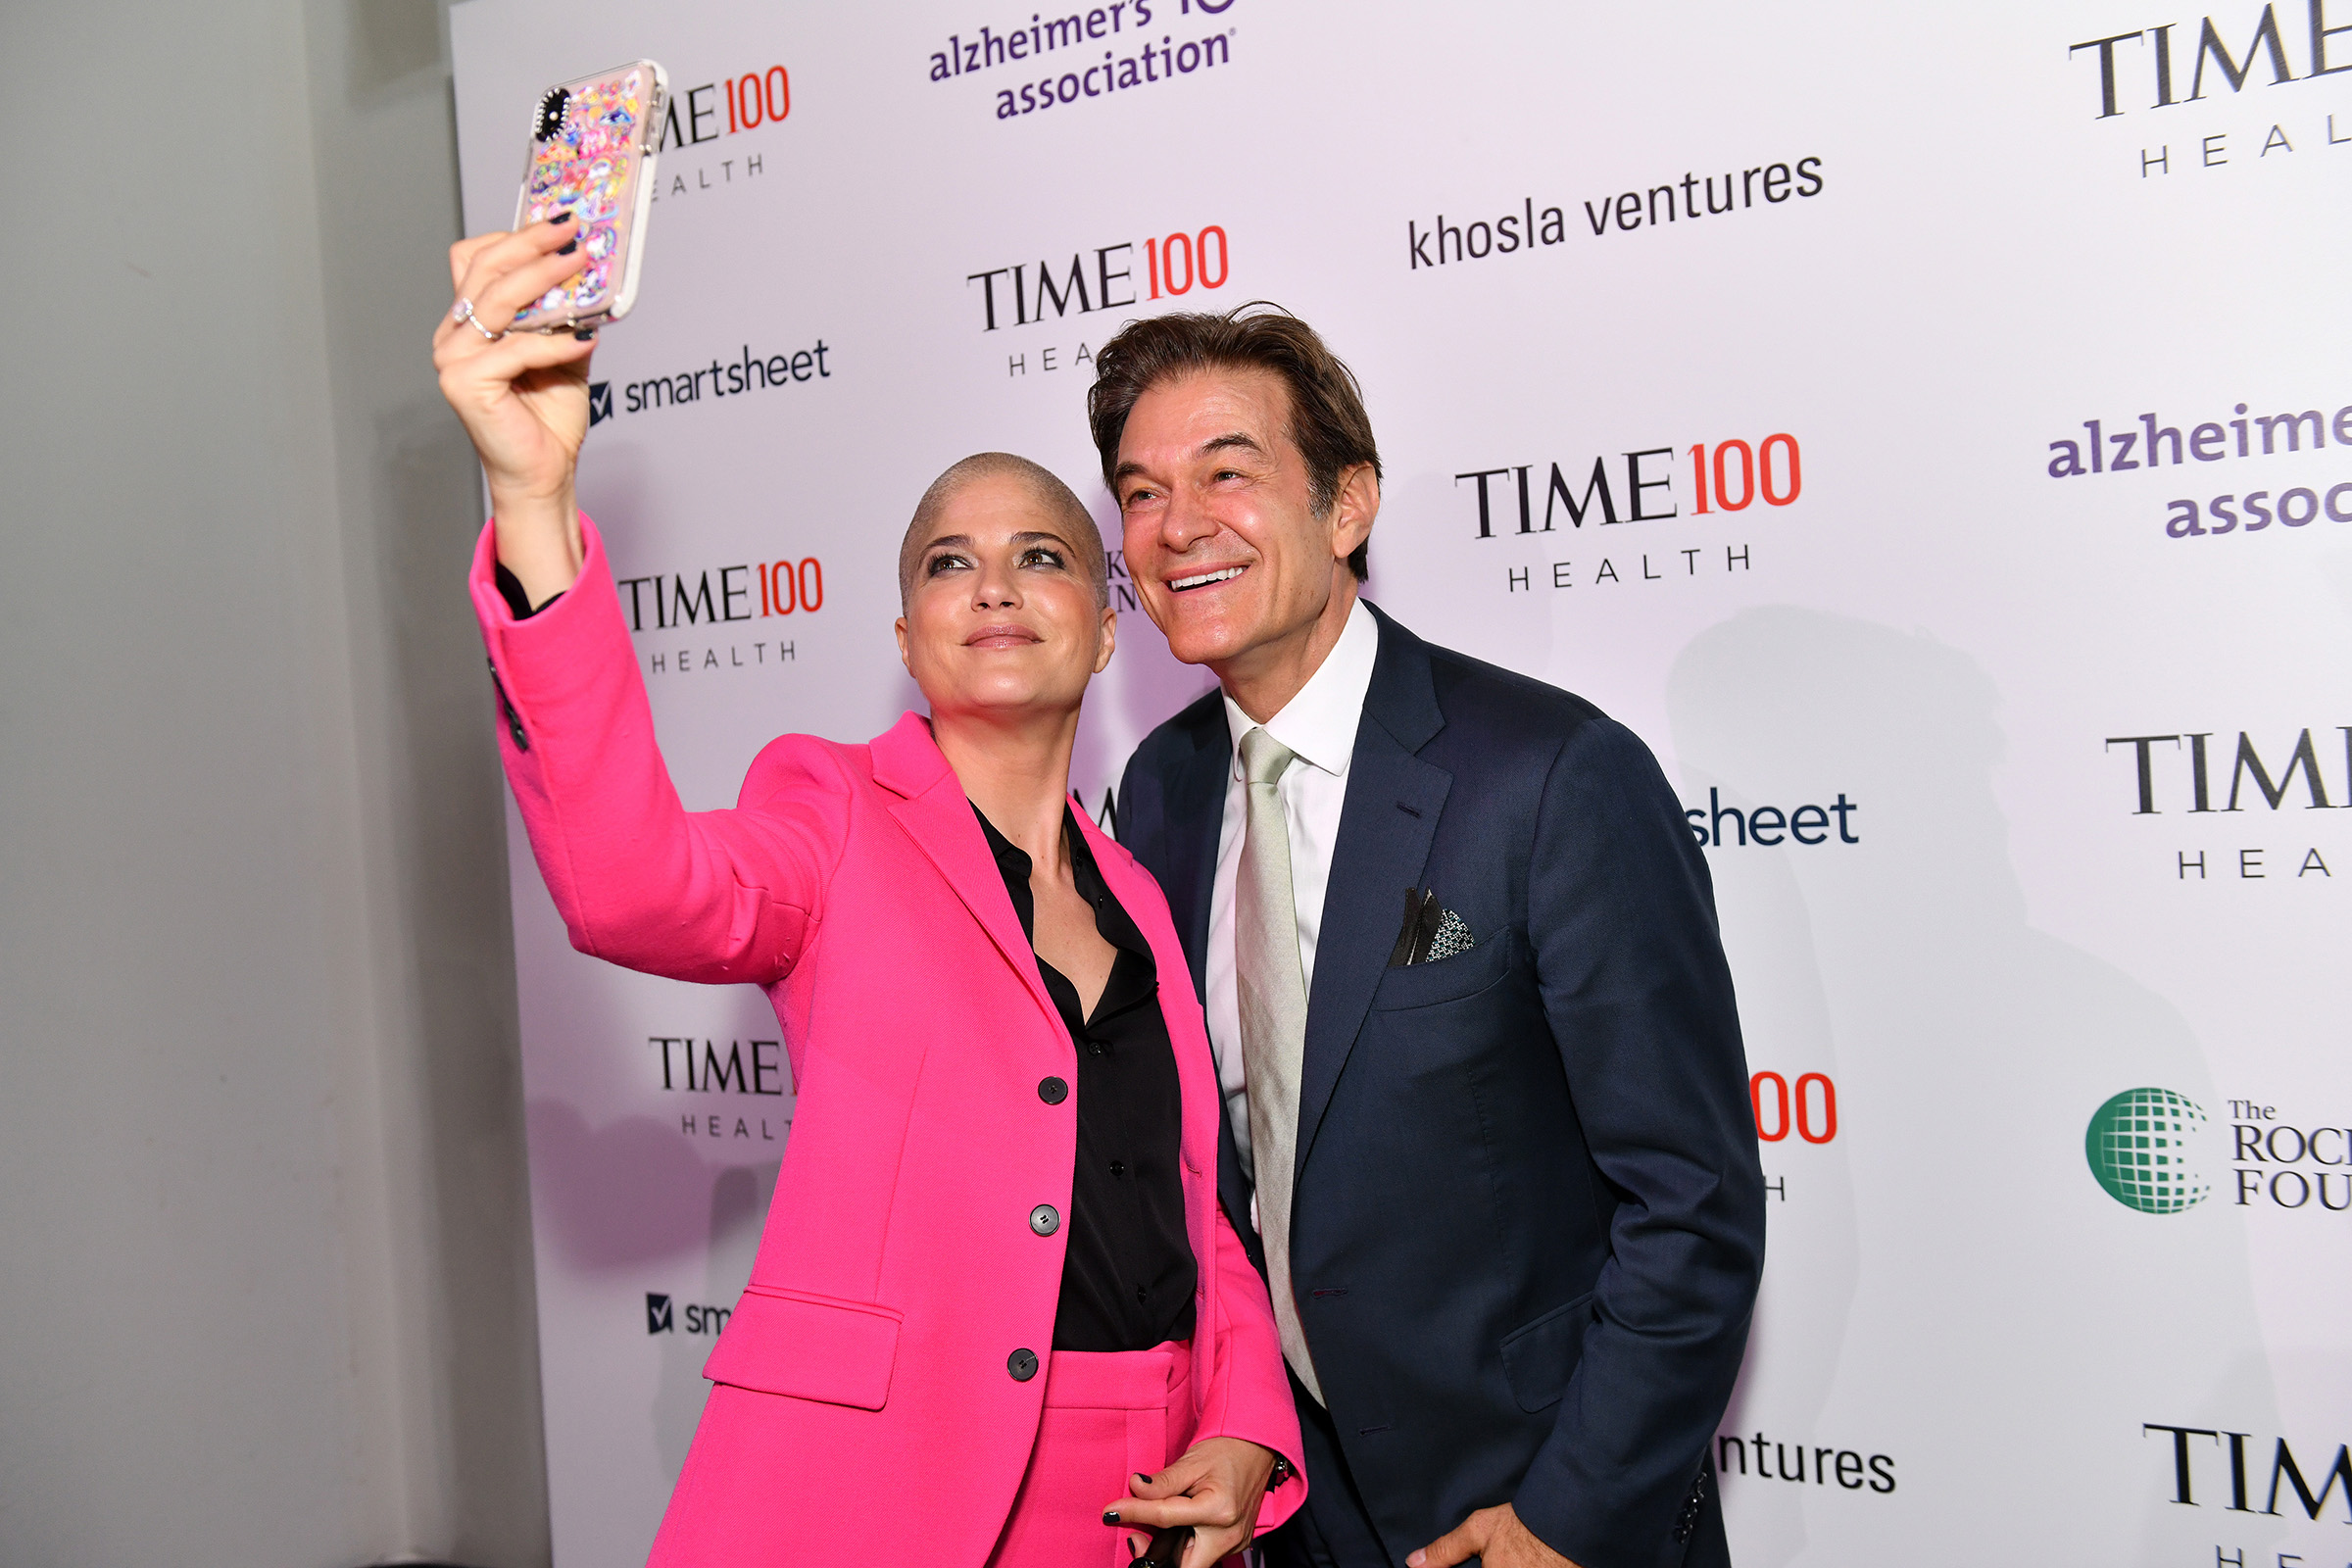 Actor Selma Blair (L) and and Dr. Mehmet Oz arrive at the TIME 100 Health Summit at Pier 17 in New York City on Oct. 17, 2019. (Craig Barritt—Getty Images for TIME 100 Health)